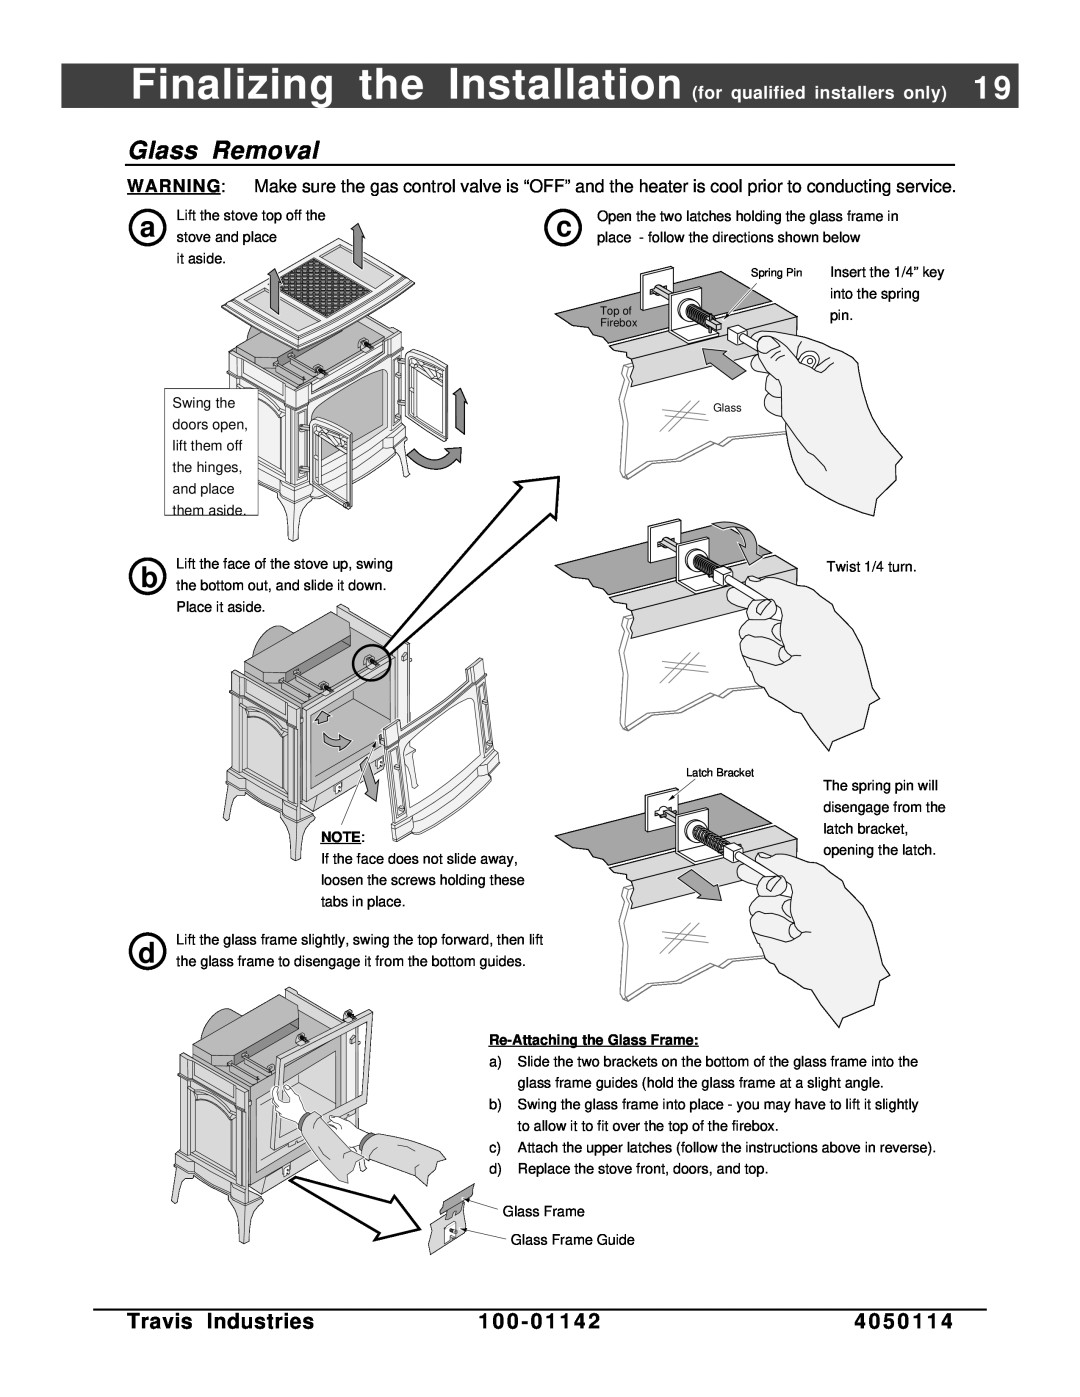 Lopi Direct Vent Freestanding Stove owner manual Glass Removal, Travis Industries, 1 0 0 - 0 1, 4 0 5 